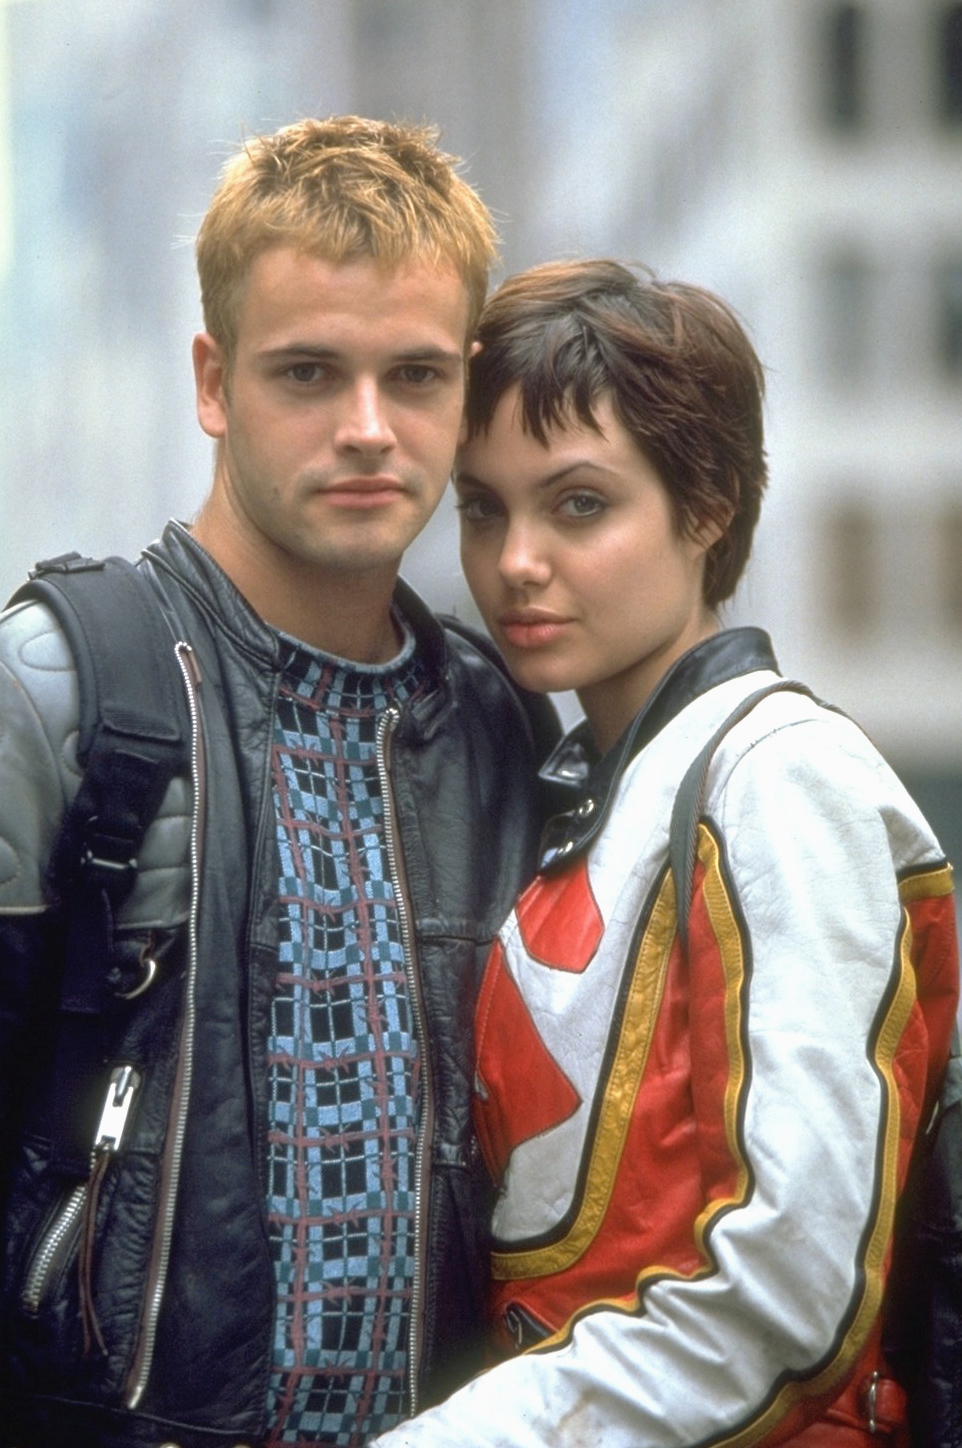 Jonny in a leather jacket and Angie in a red-striped jacket